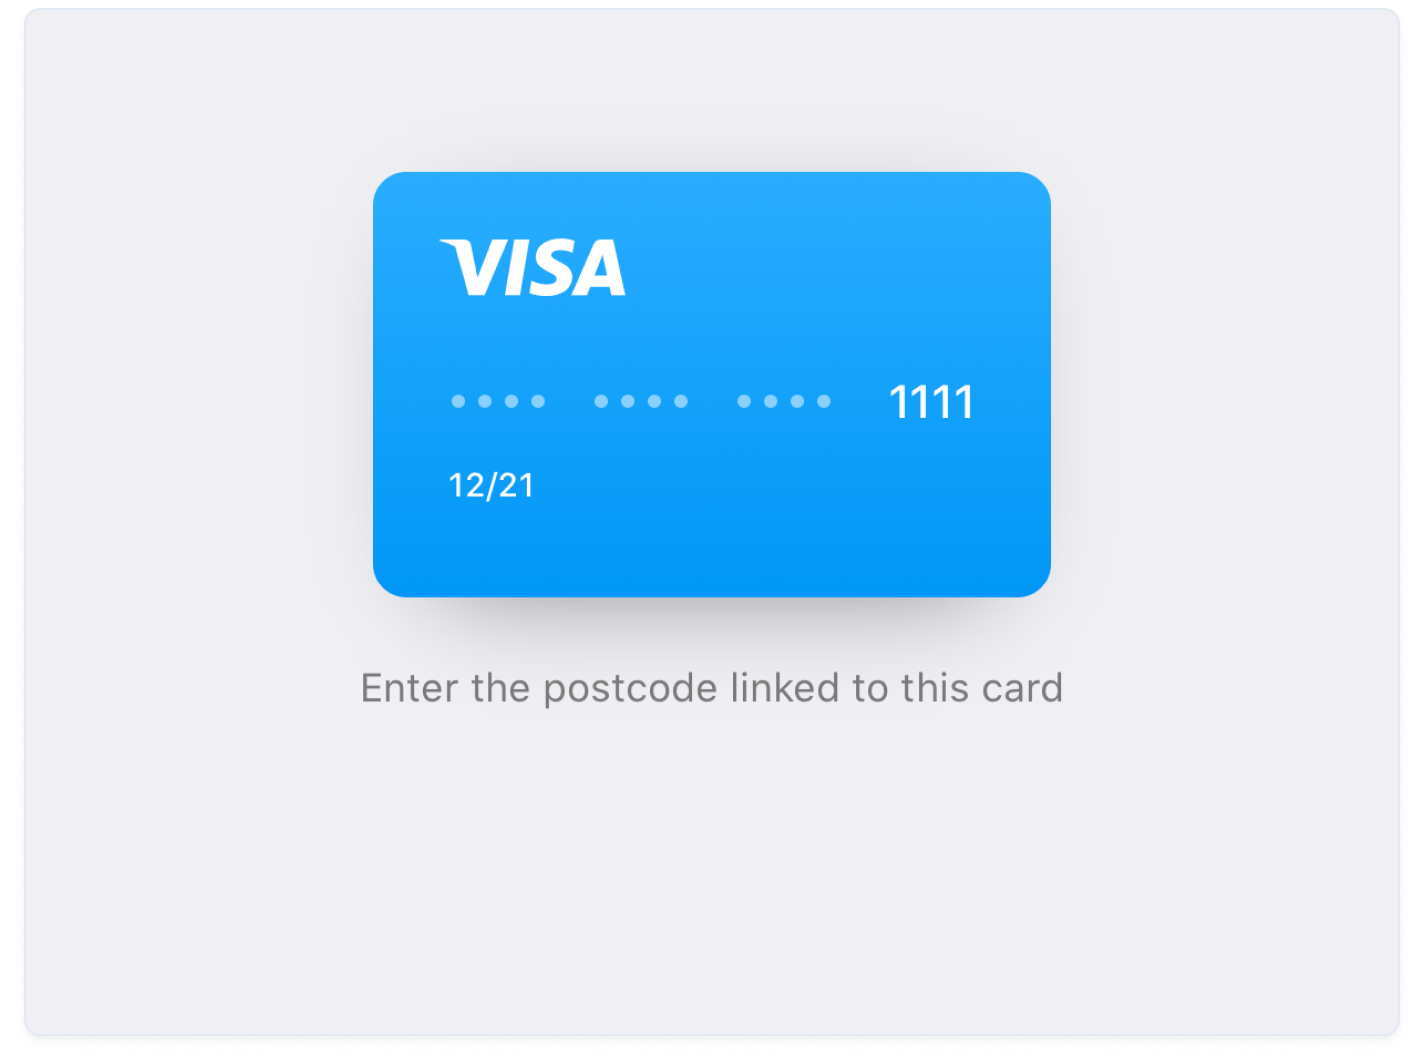 A graphic showing how credit card UI strings, such as ZIP code and postcode, can vary by region.